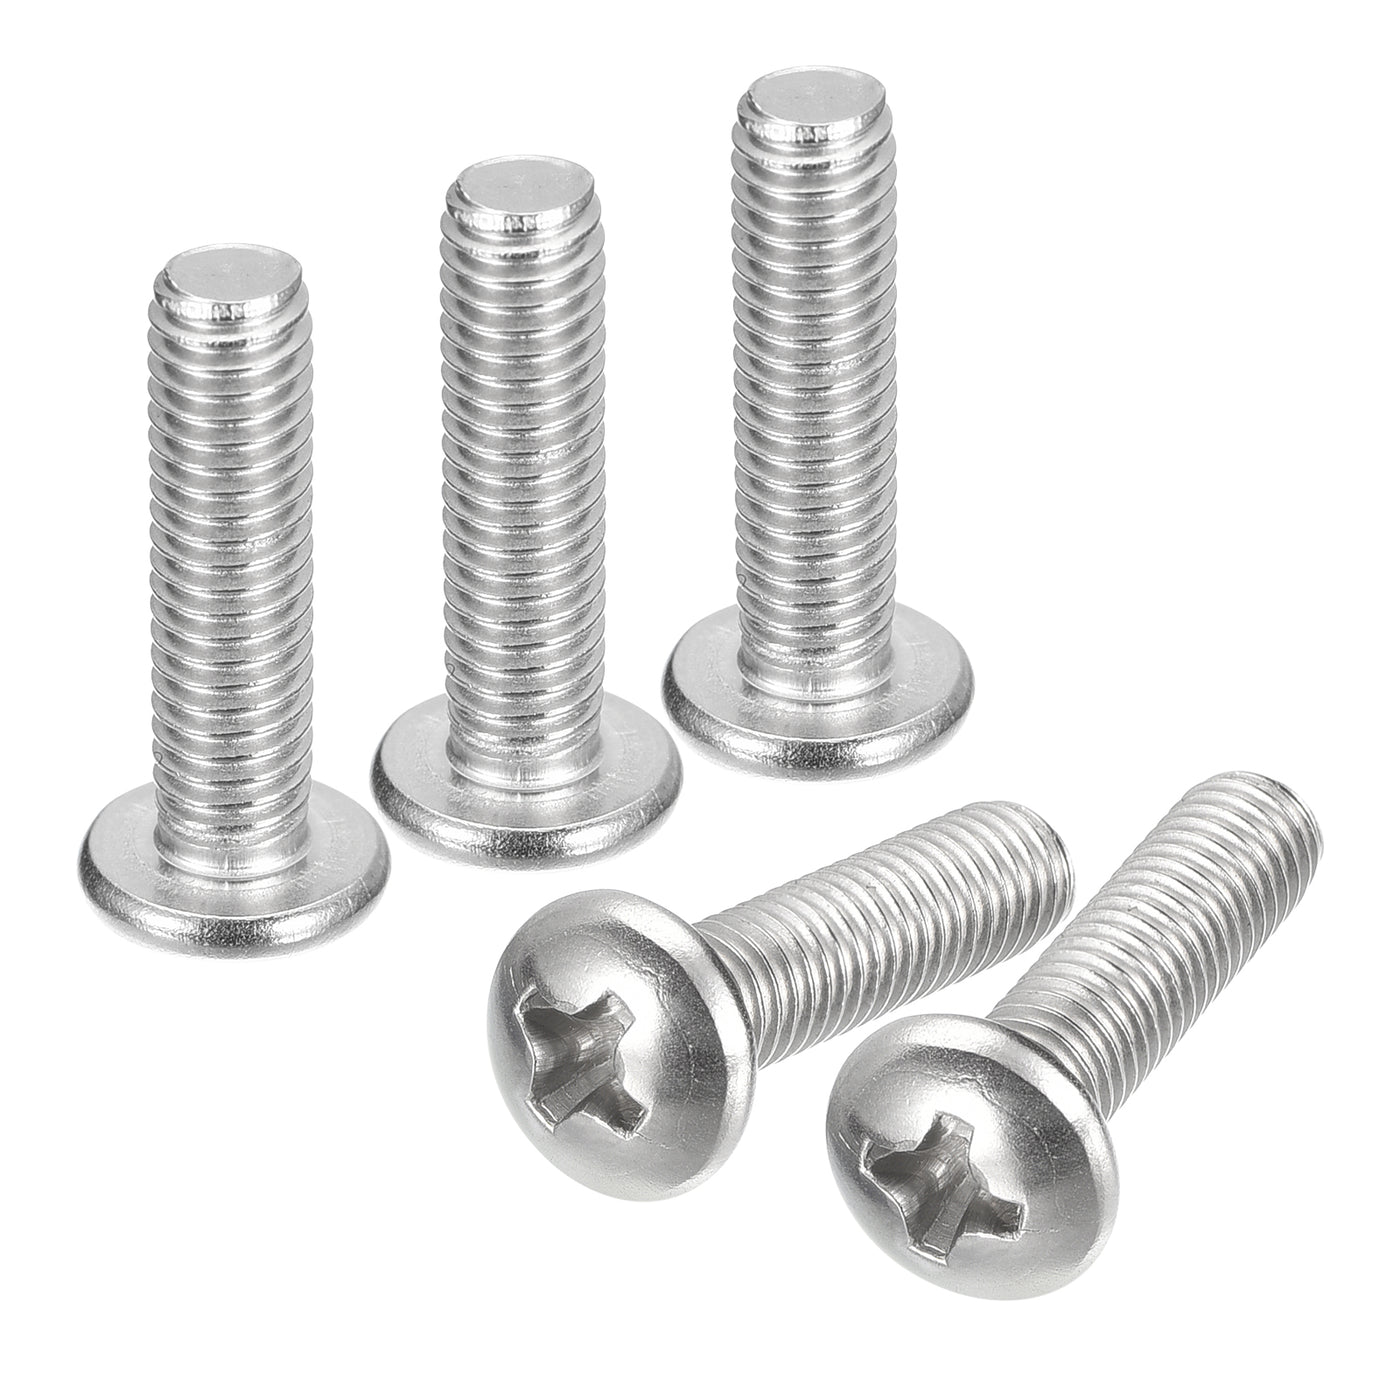 uxcell Uxcell #10-32x3/4" Pan Head Machine Screws, Stainless Steel 18-8 Screw, Pack of 20